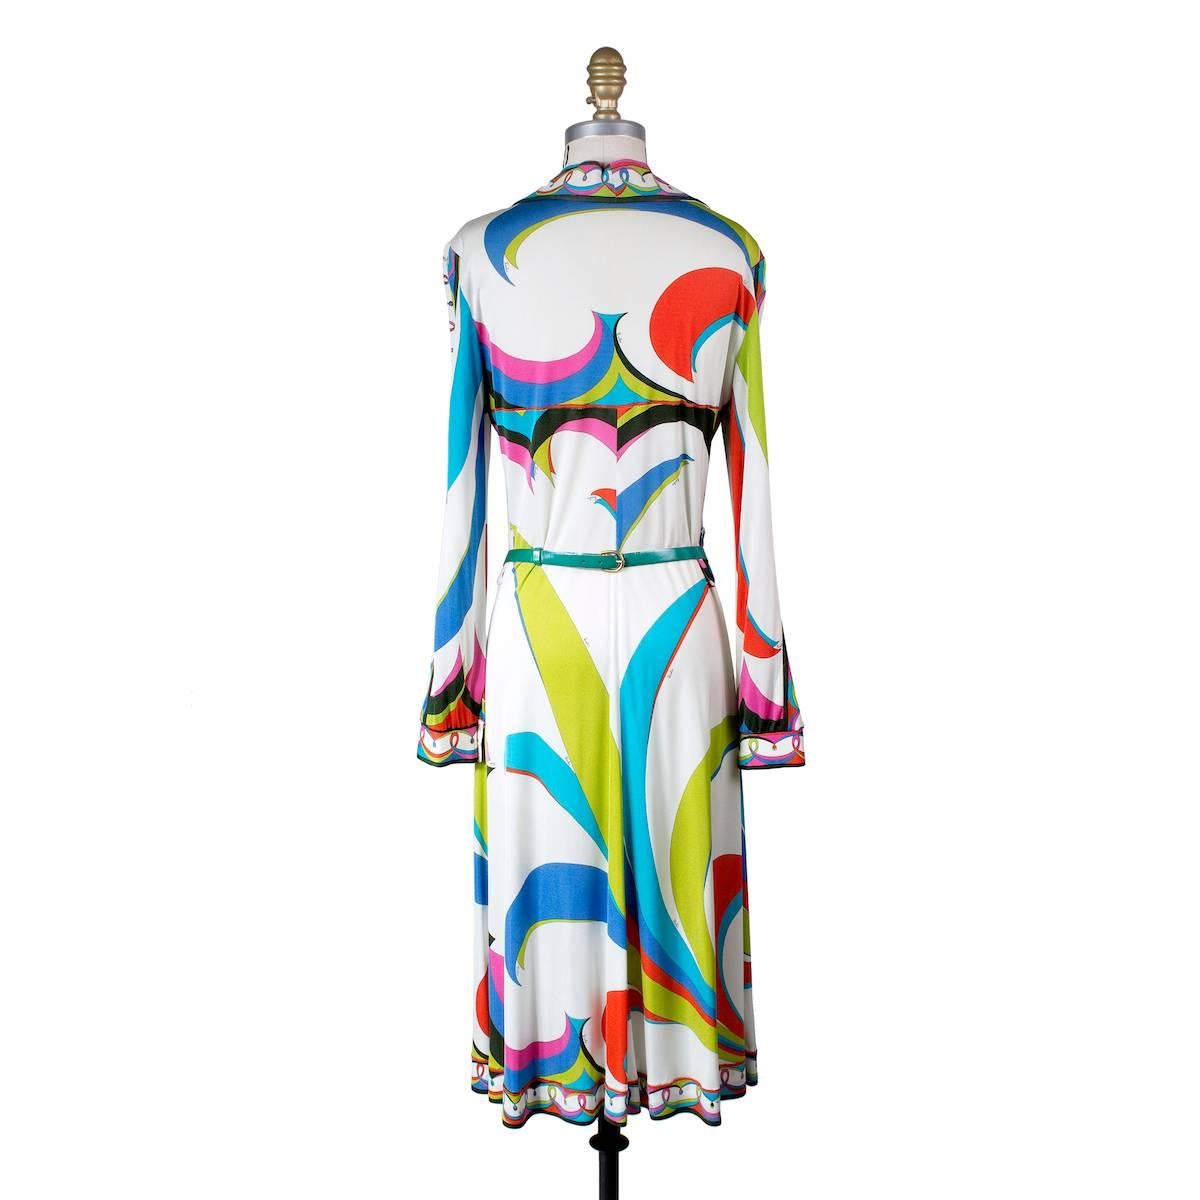 This is a vintage Pucci dress circa 1970s.  It features a signature Pucci print and includes a matching belt to cinch the waist.